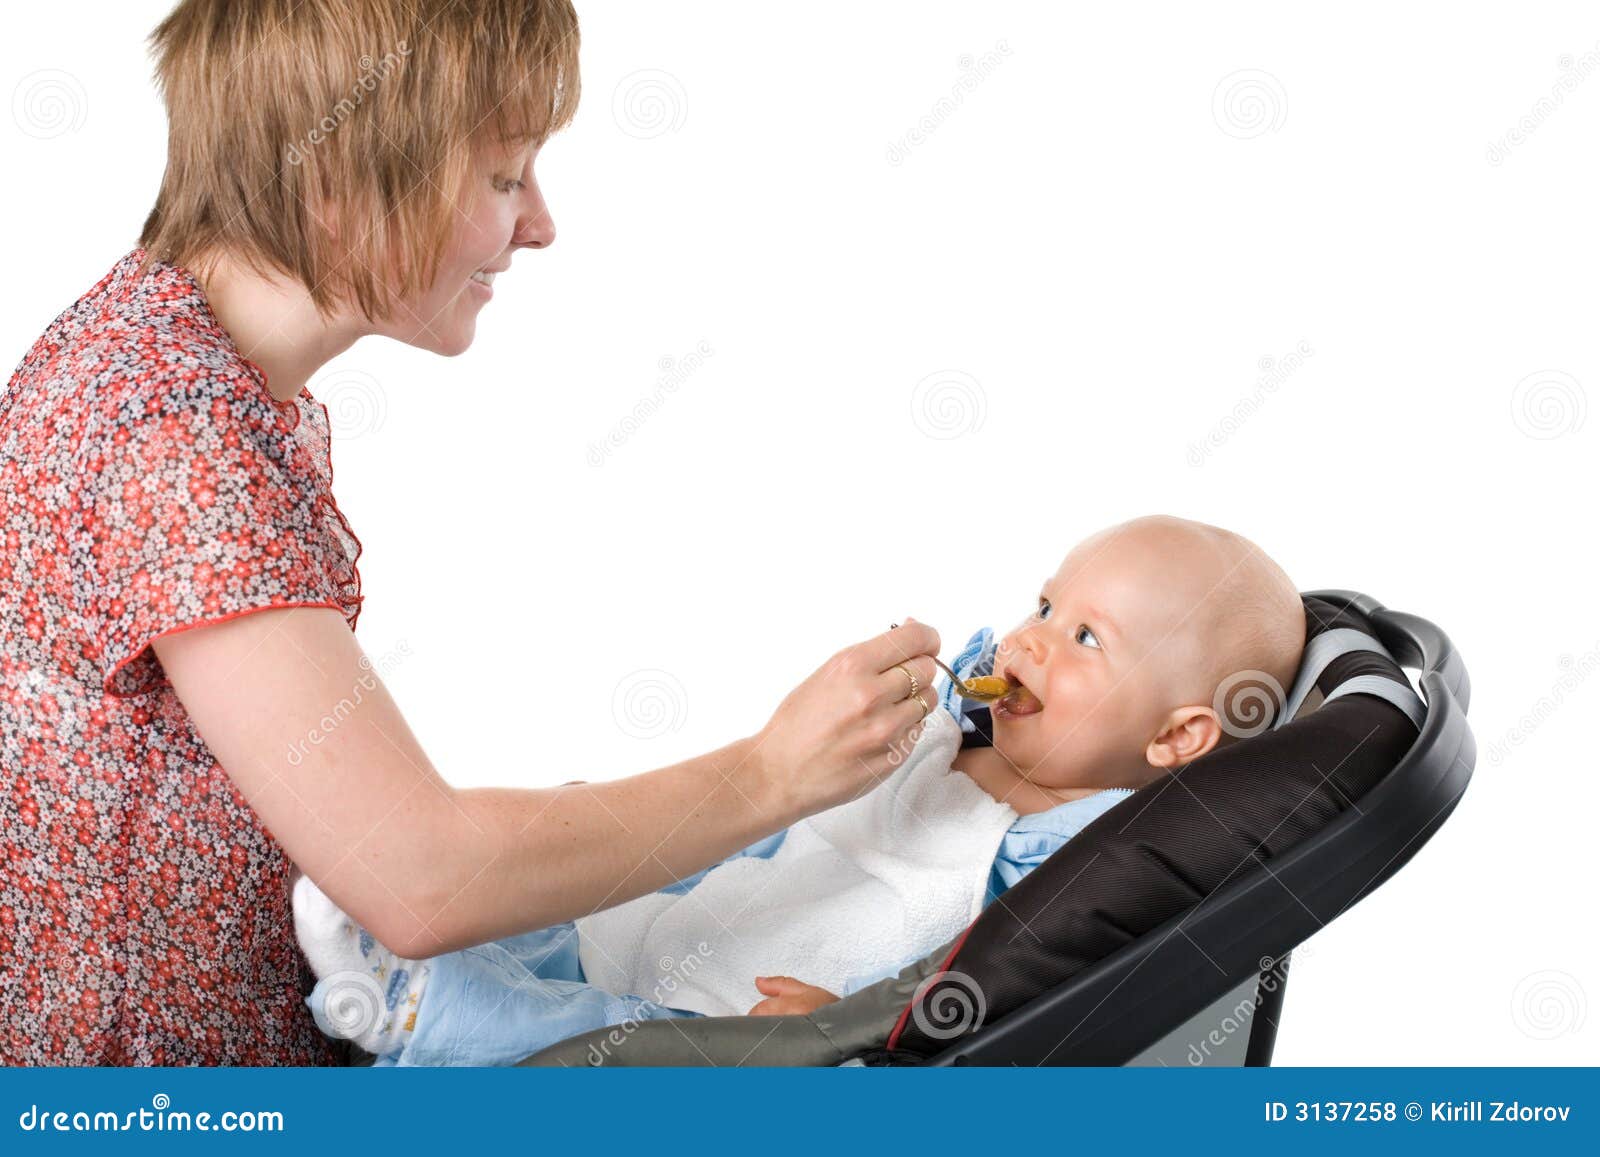 seat for feeding baby